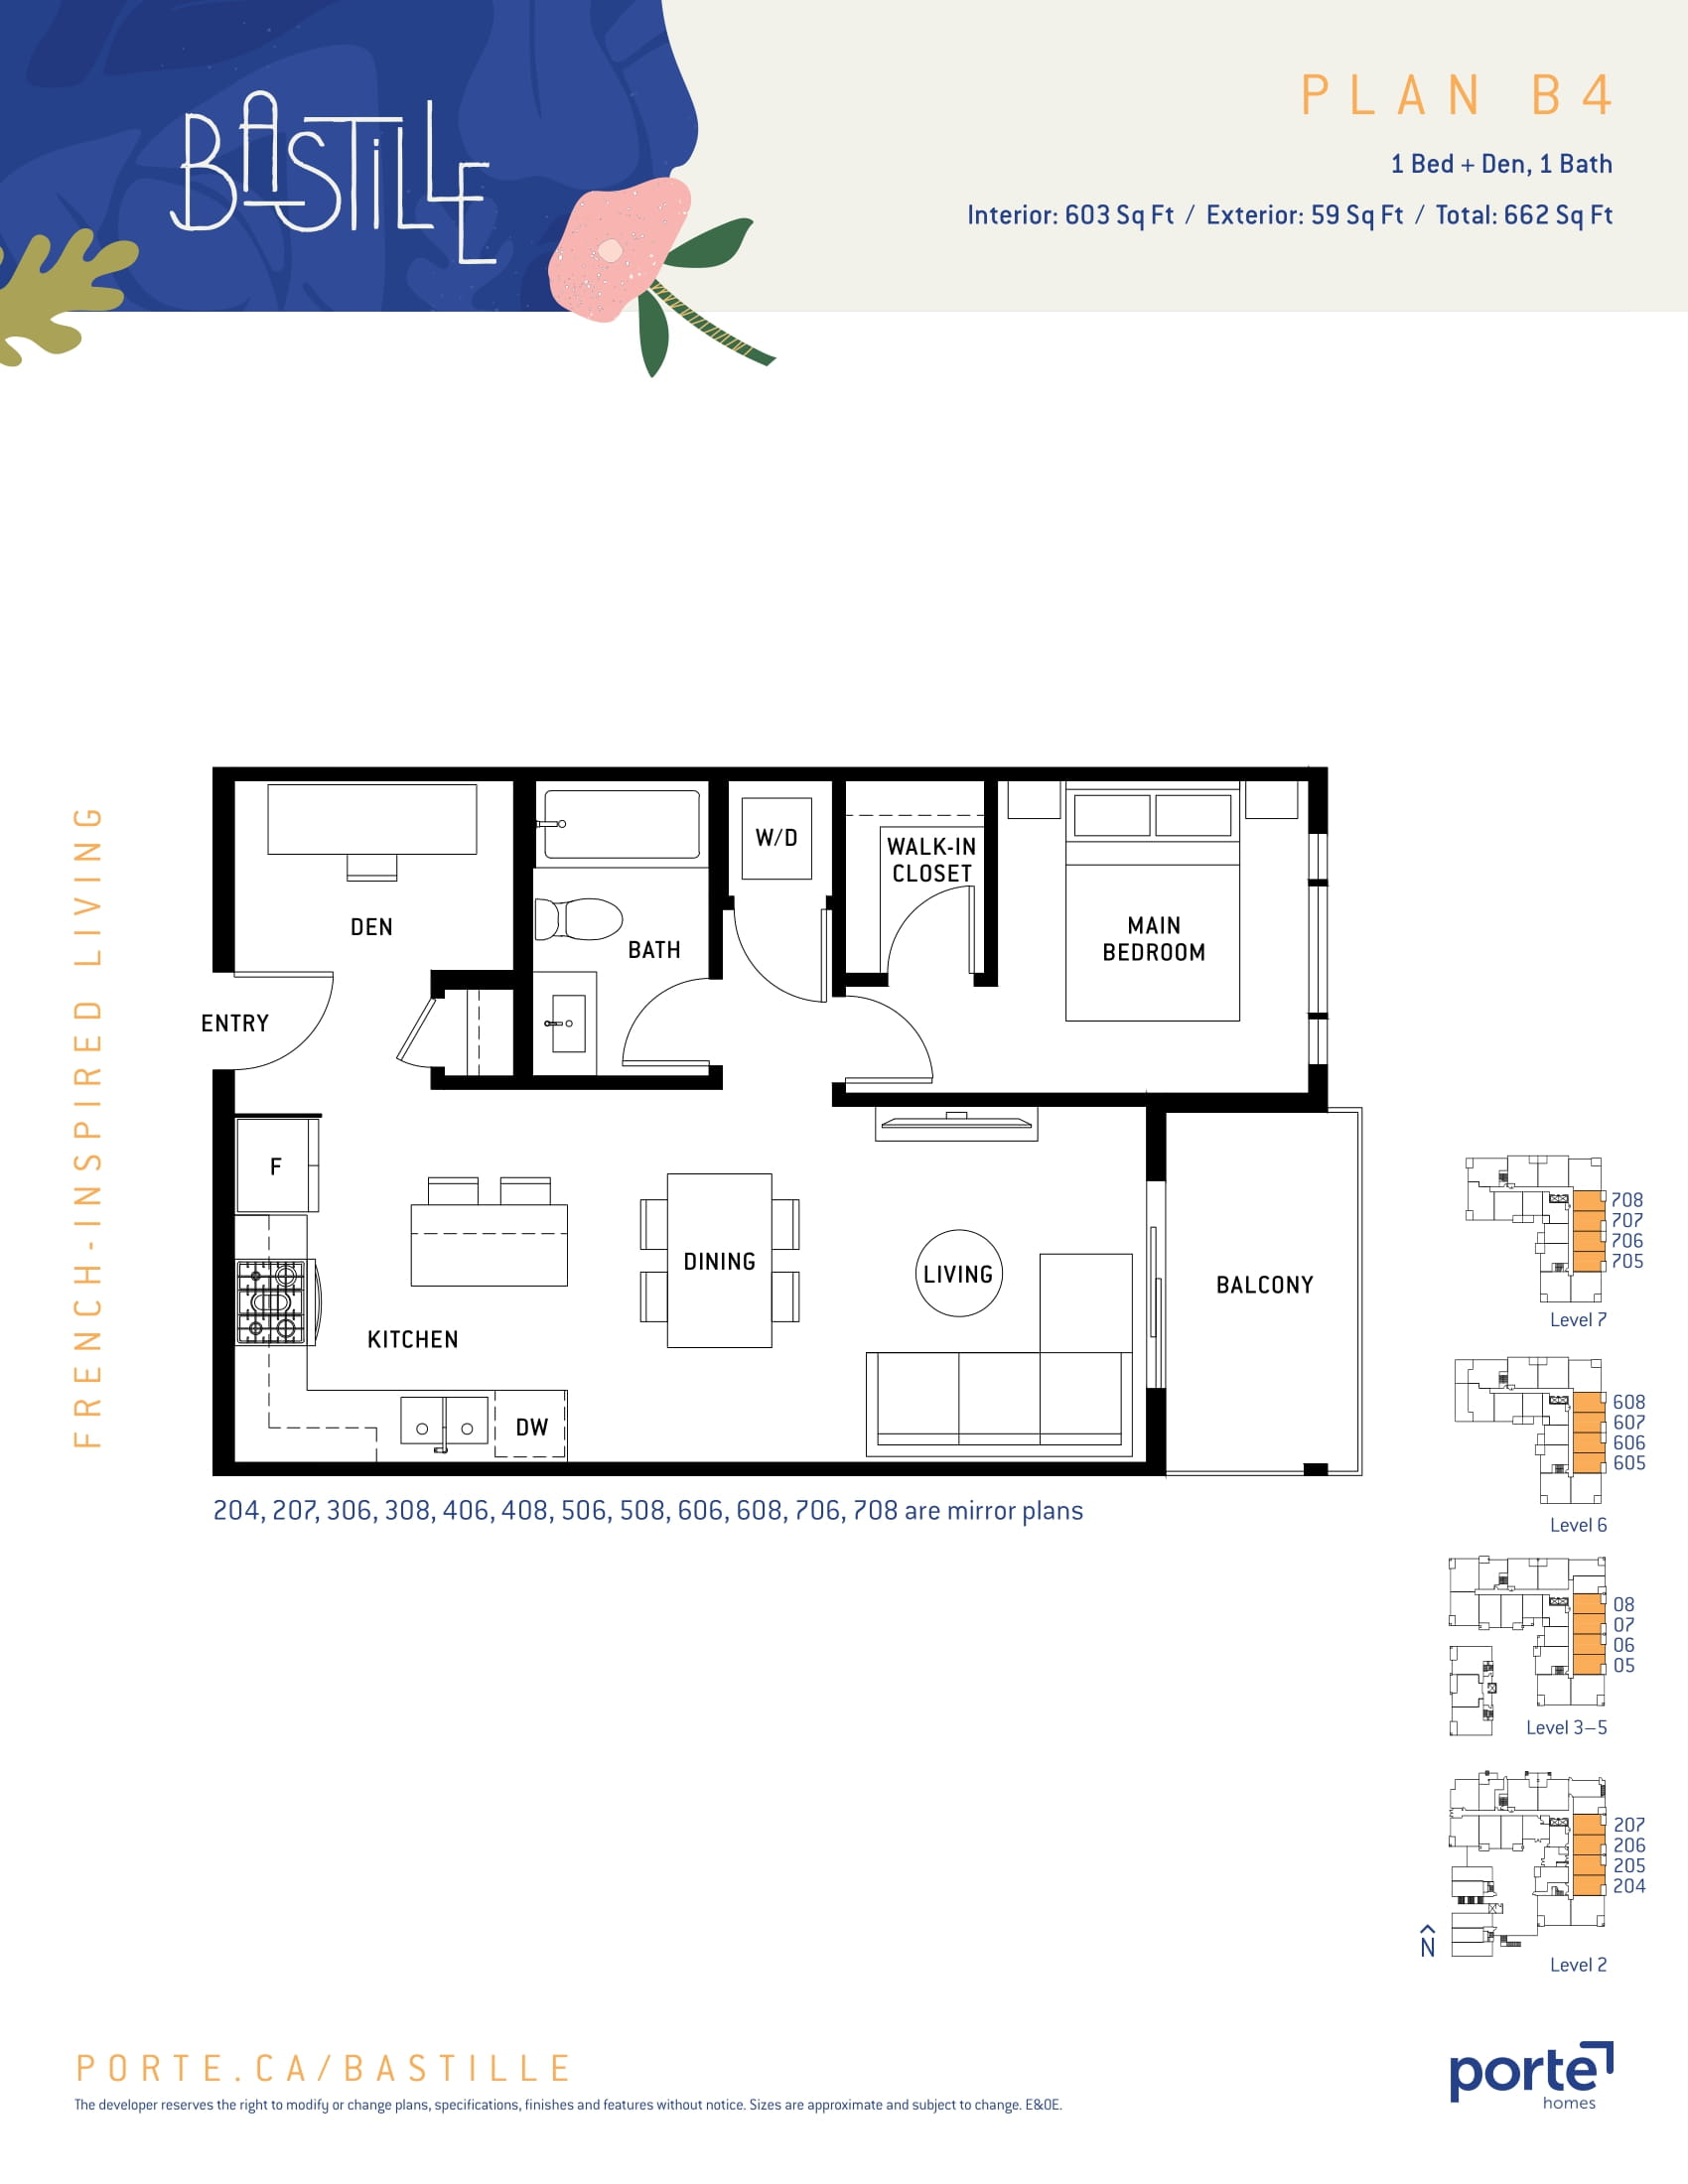  Floor Plan of Bastille Condos with undefined beds